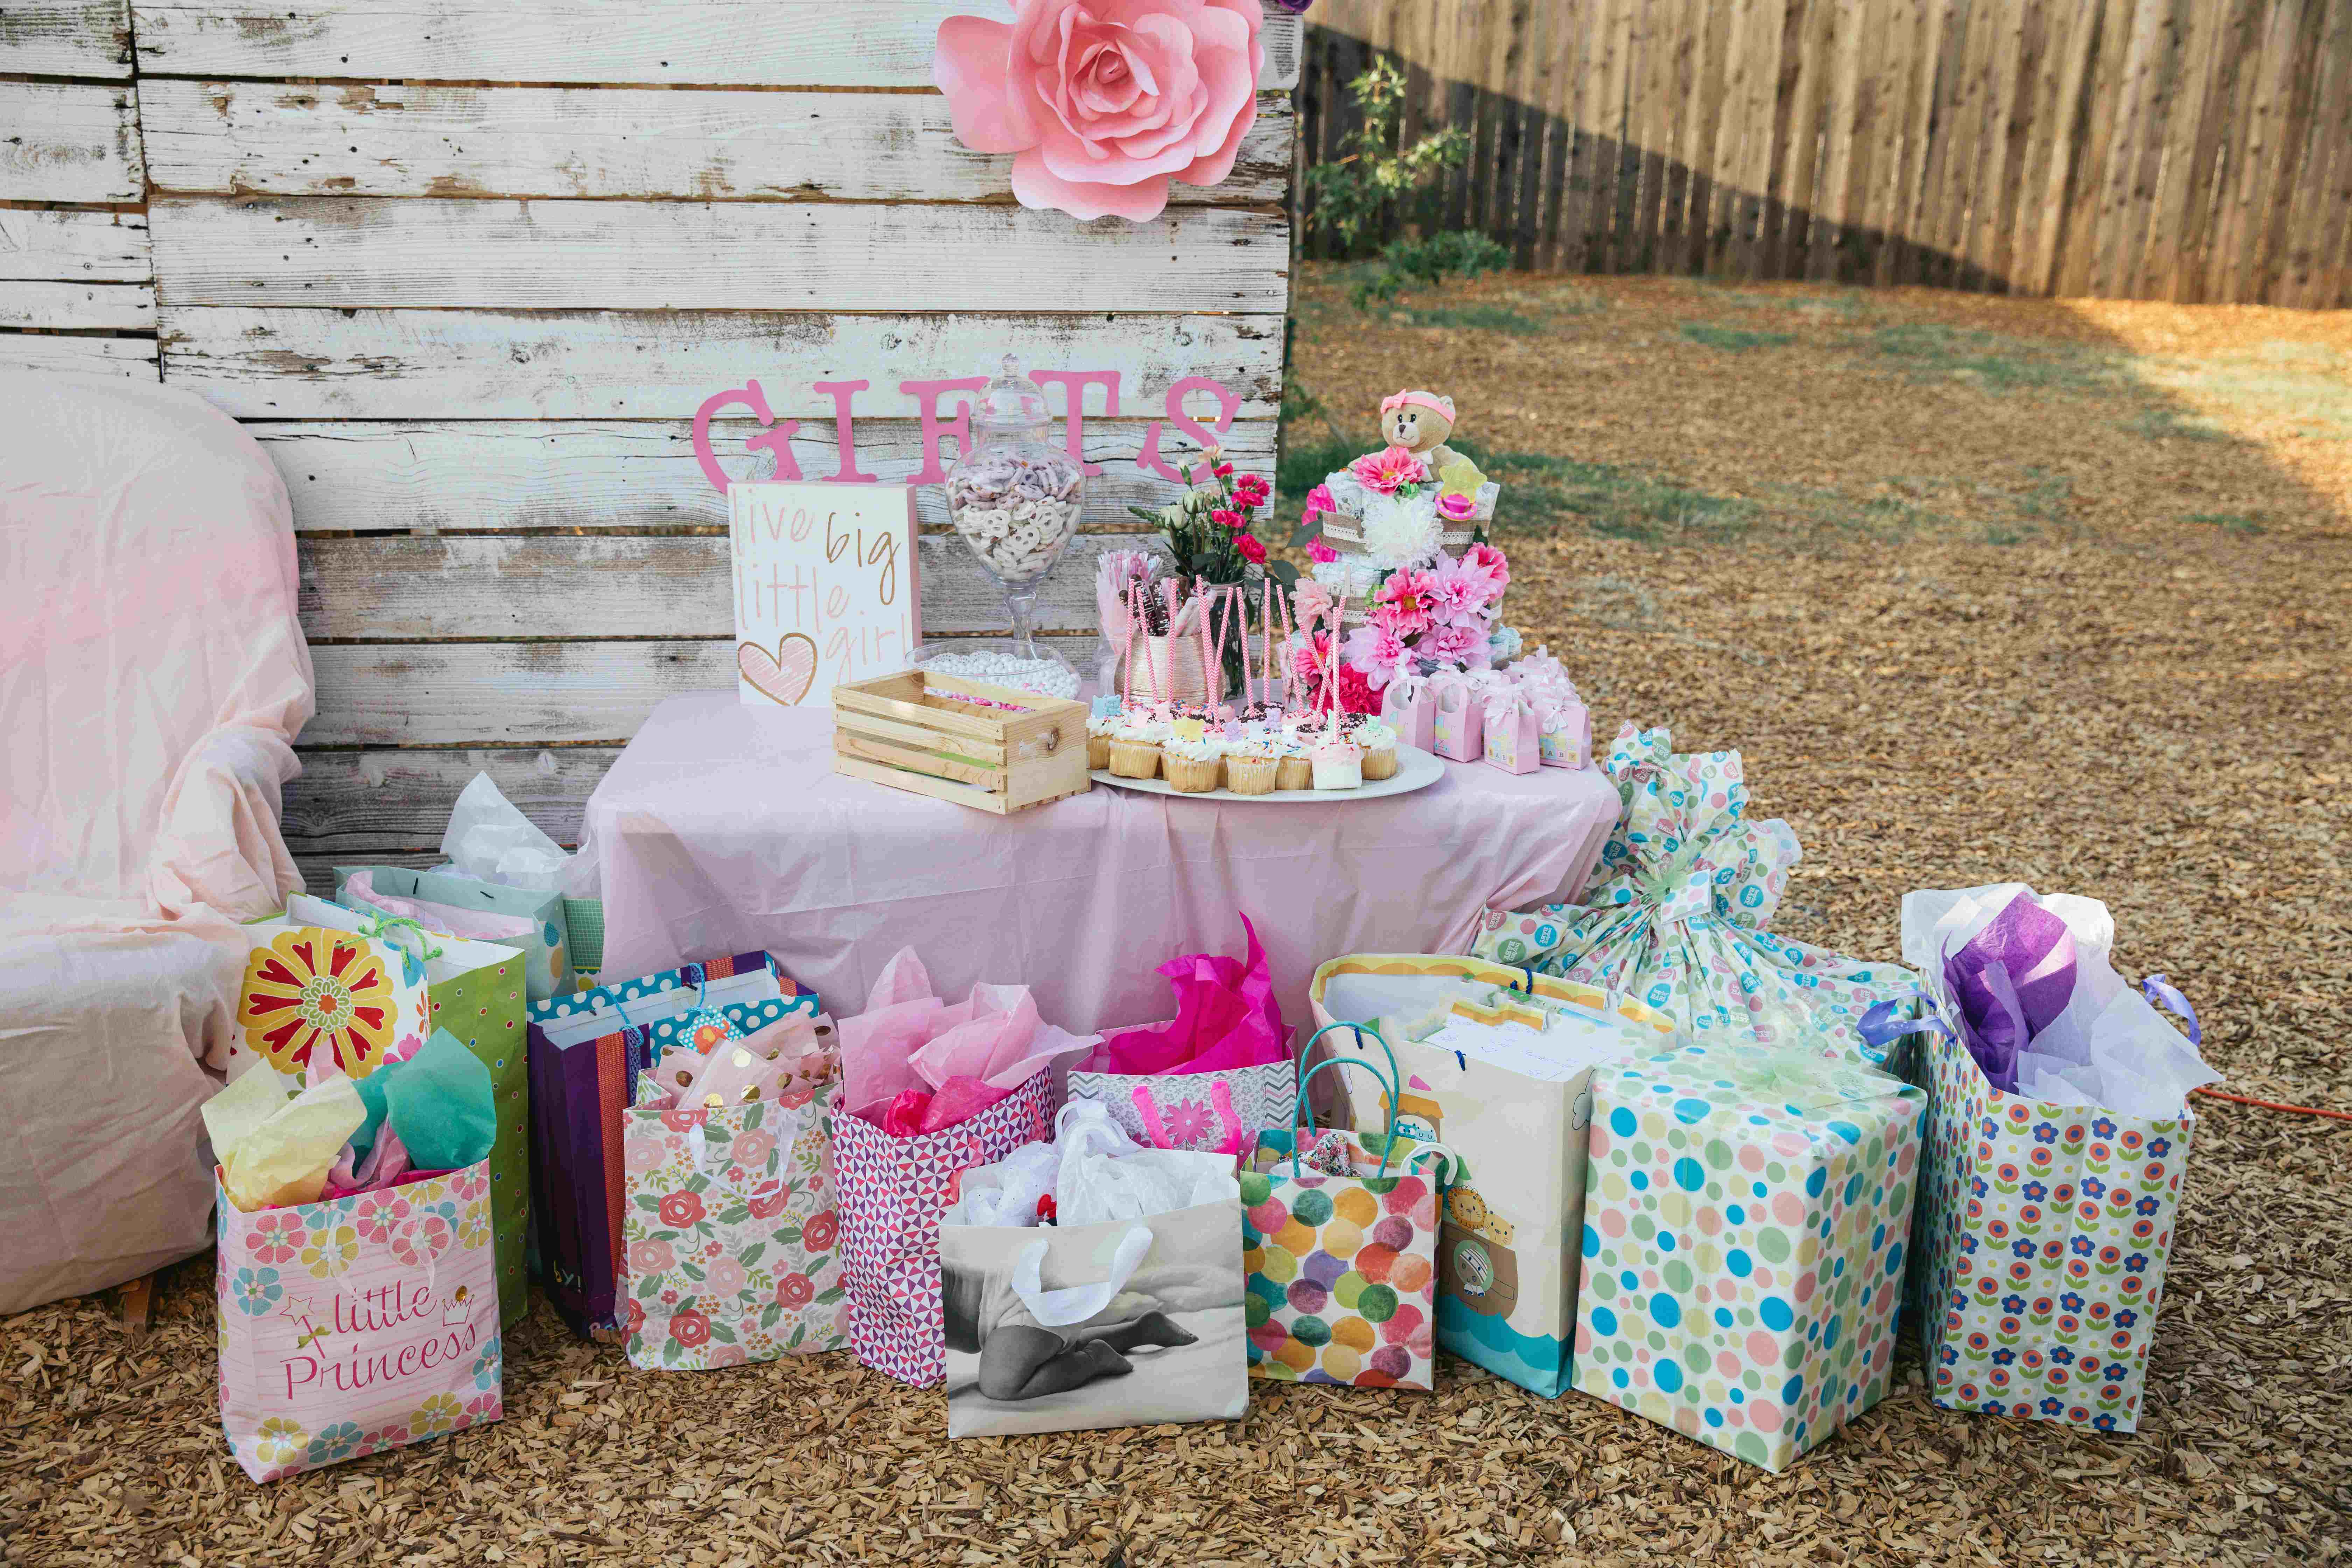 Baby shower gifts for a sweet outdoor celebration in the backyard